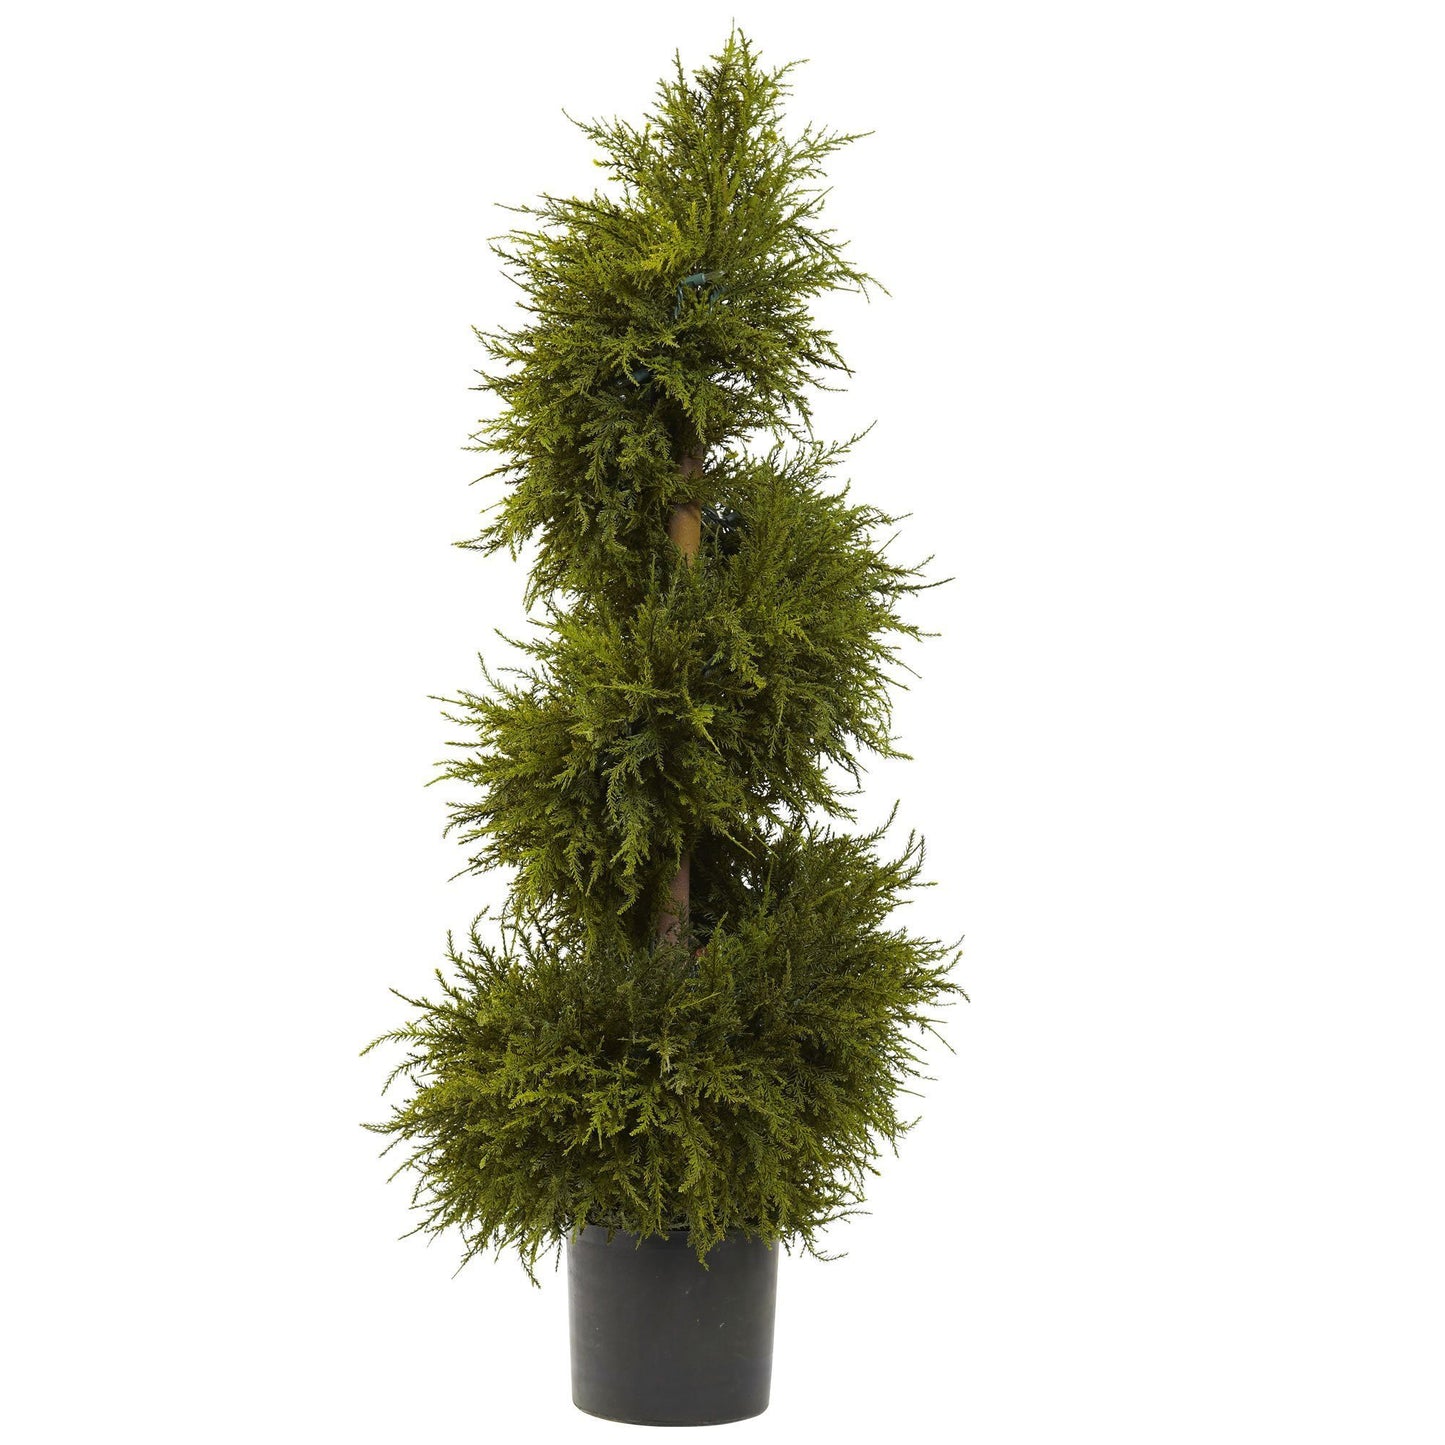 43” Cedar Spiral Topiary w/Lights | Nearly Natural